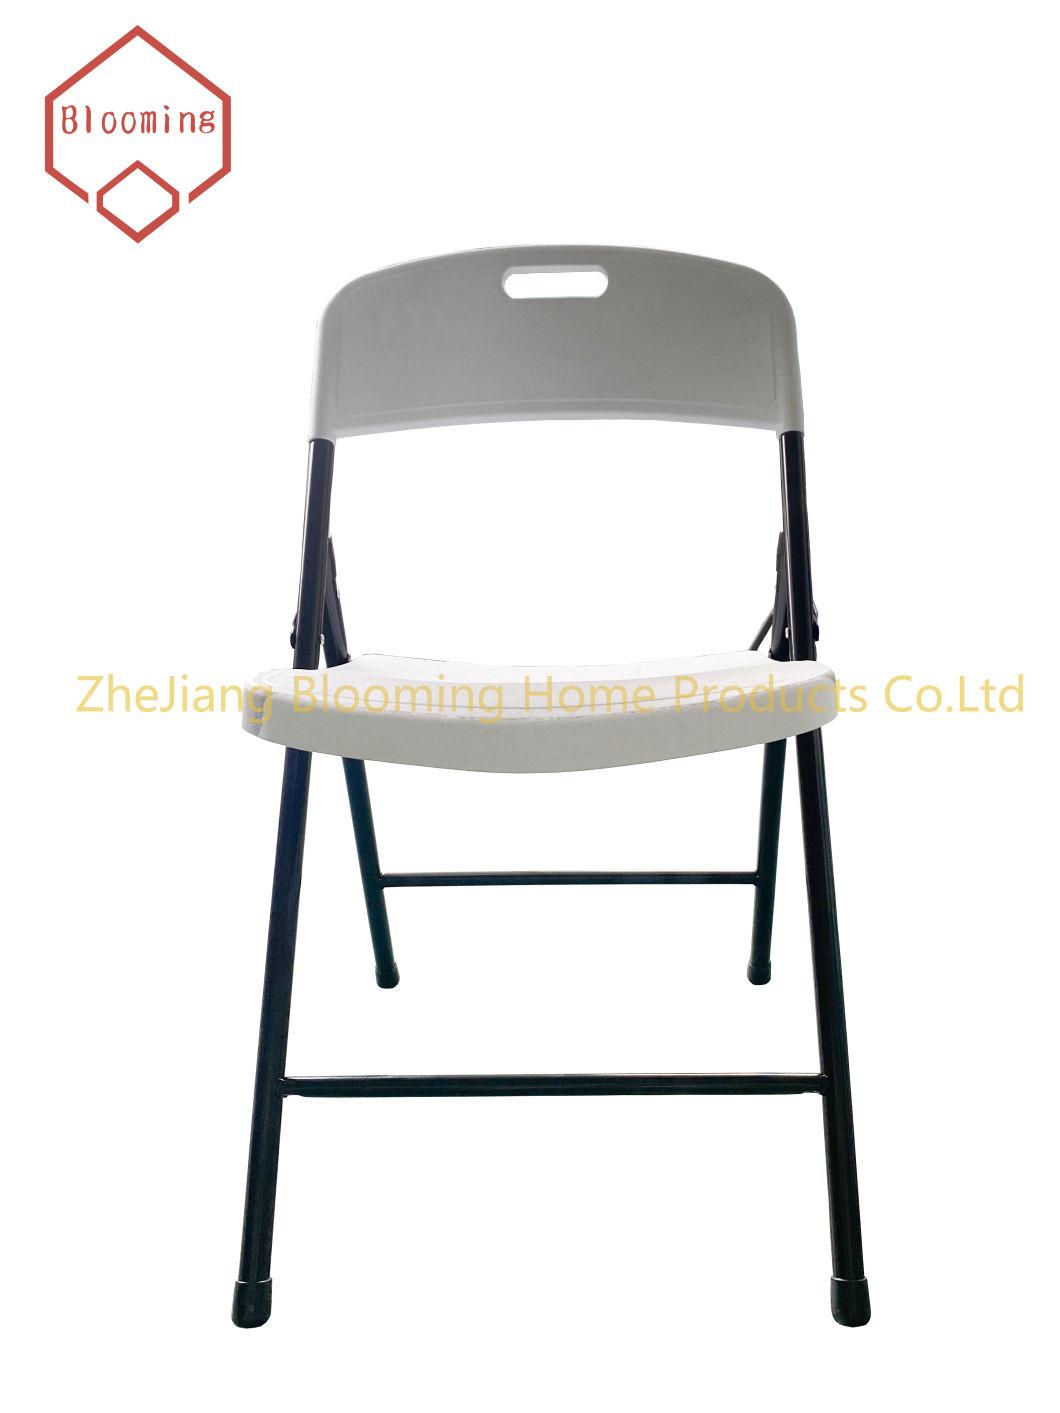 Outdoor Foldable Camping Garden Chair for Wedding Conference Events